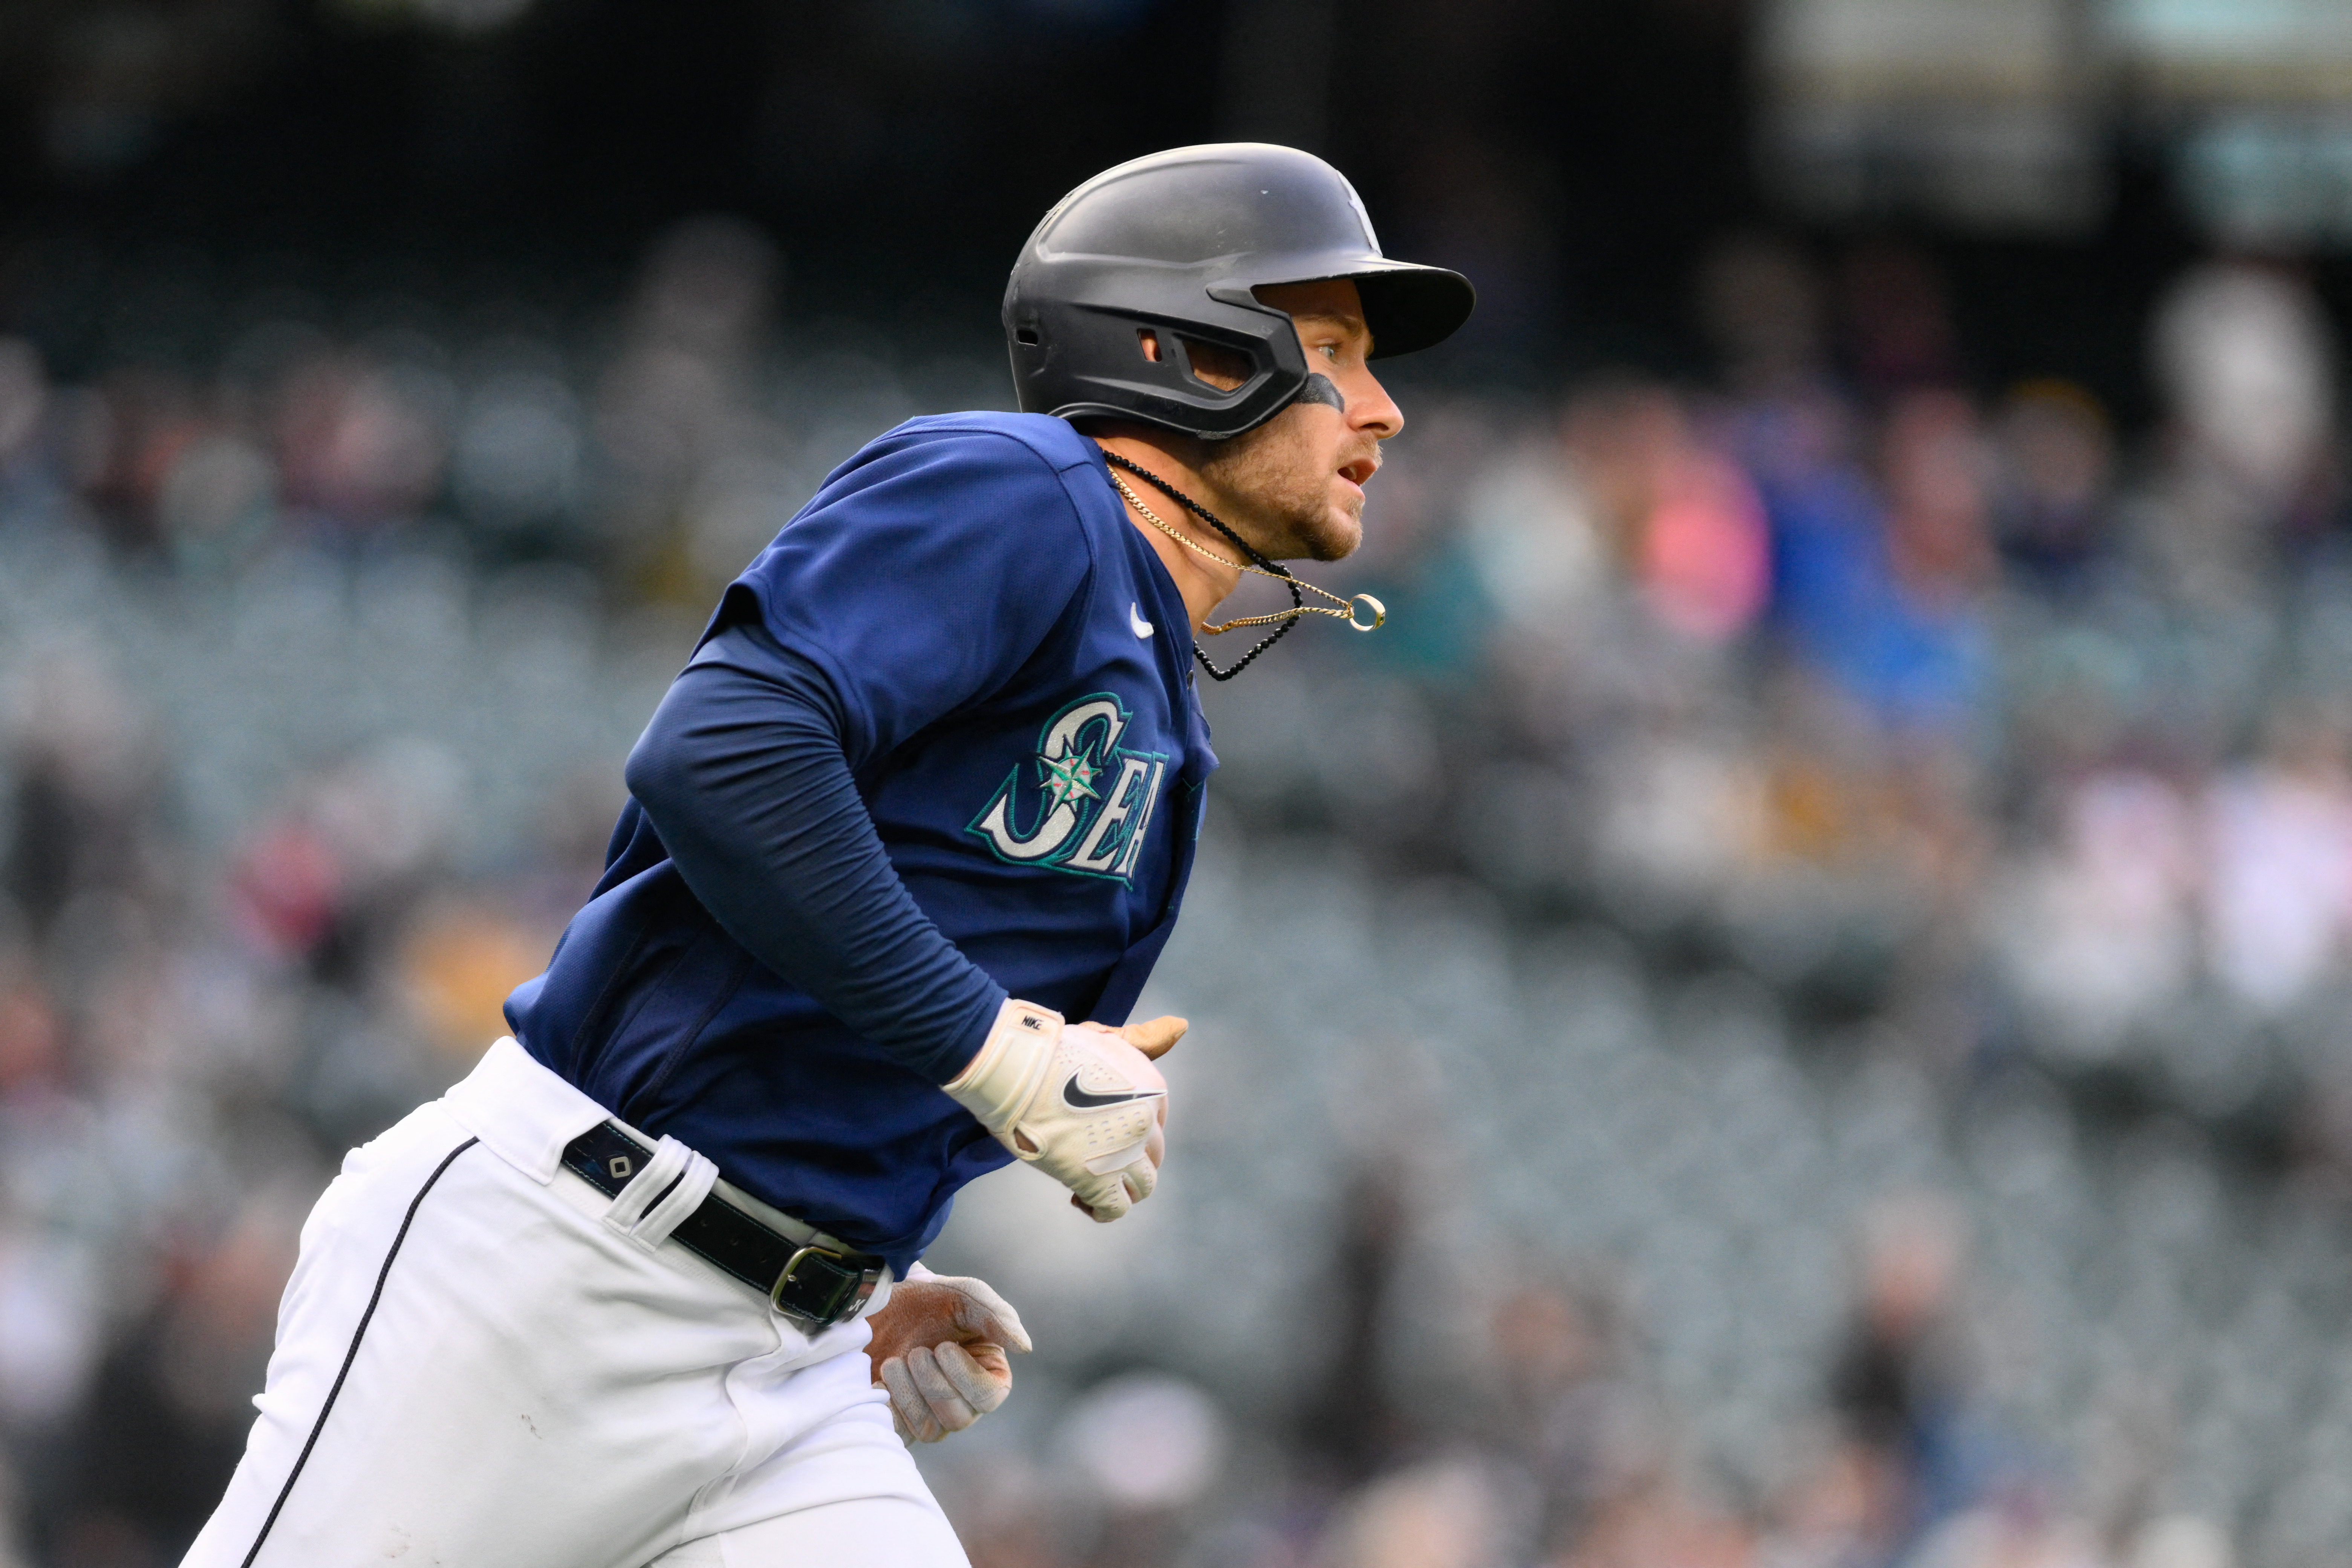 Luis Castillo guides Mariners past A's in series opener